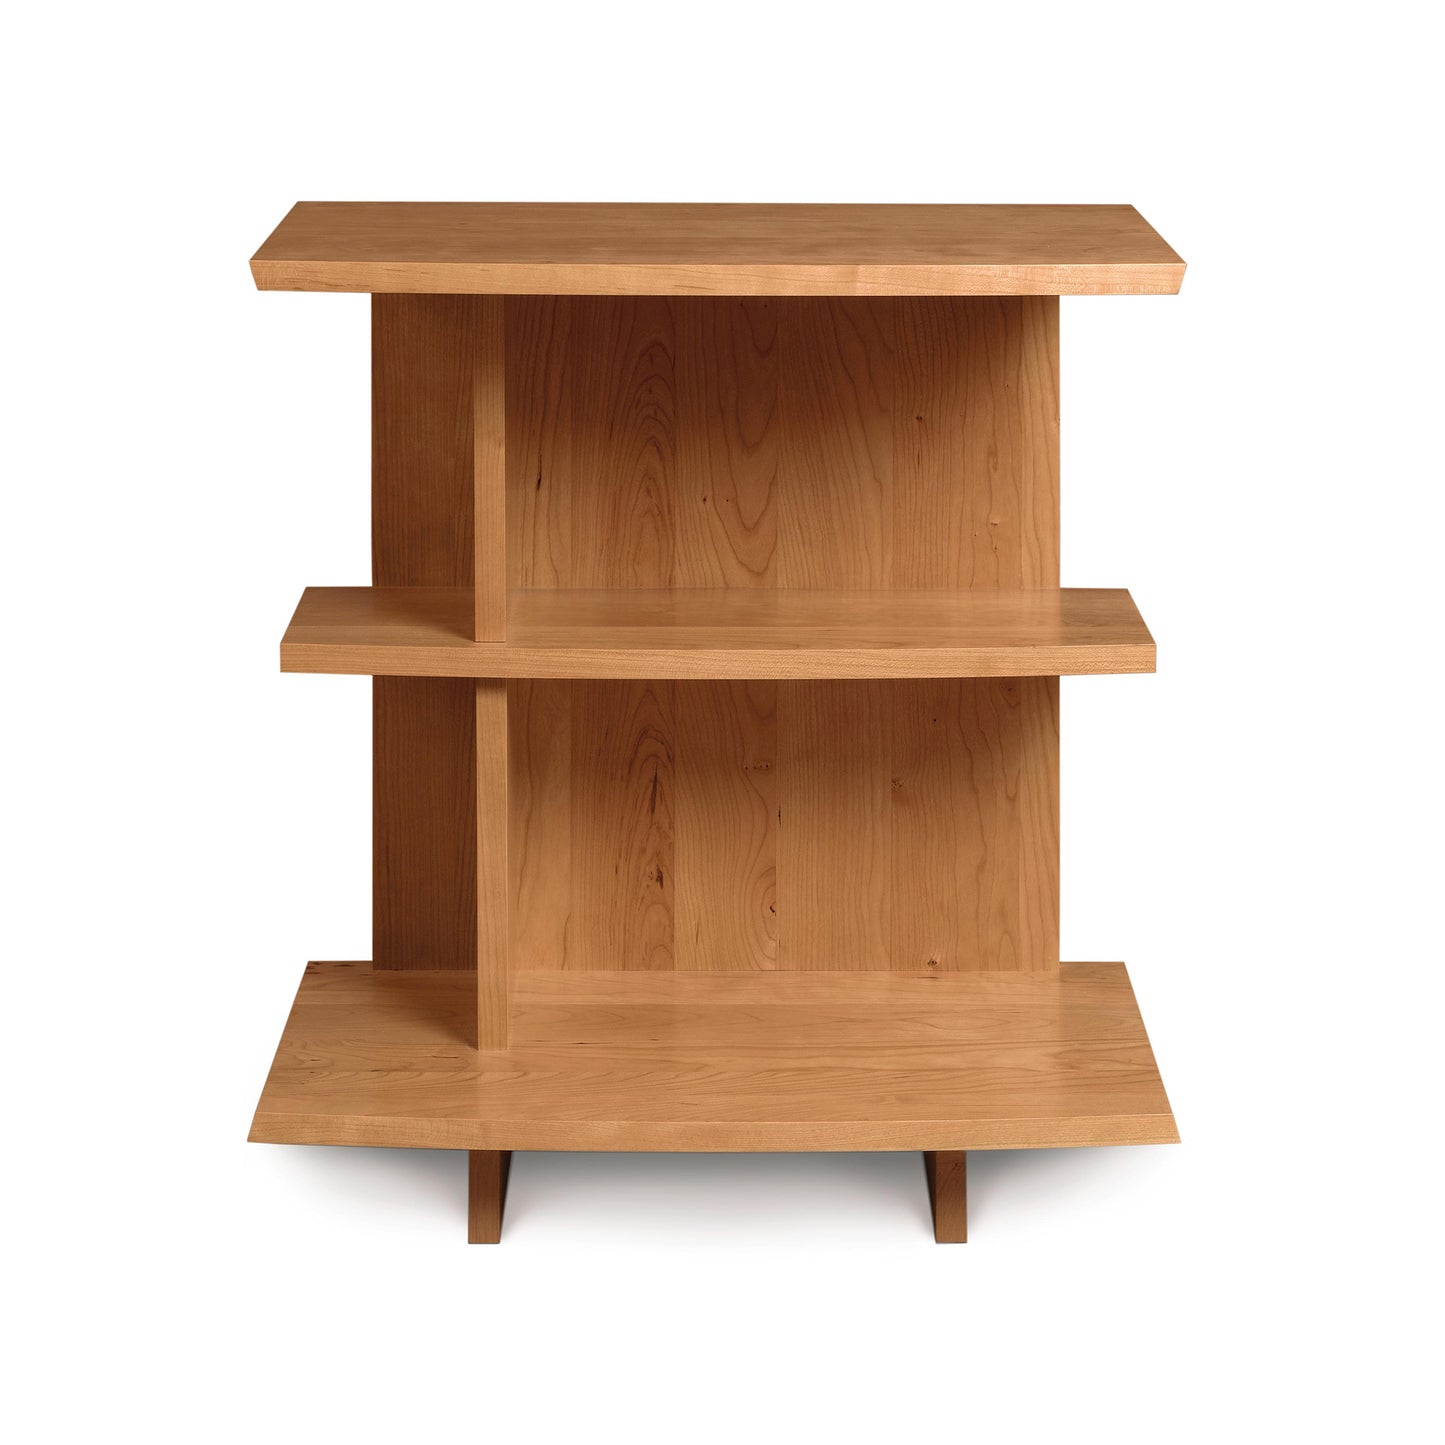 A three-tiered Berkeley Open Shelf Nightstand - Left by Copeland Furniture on a white background.